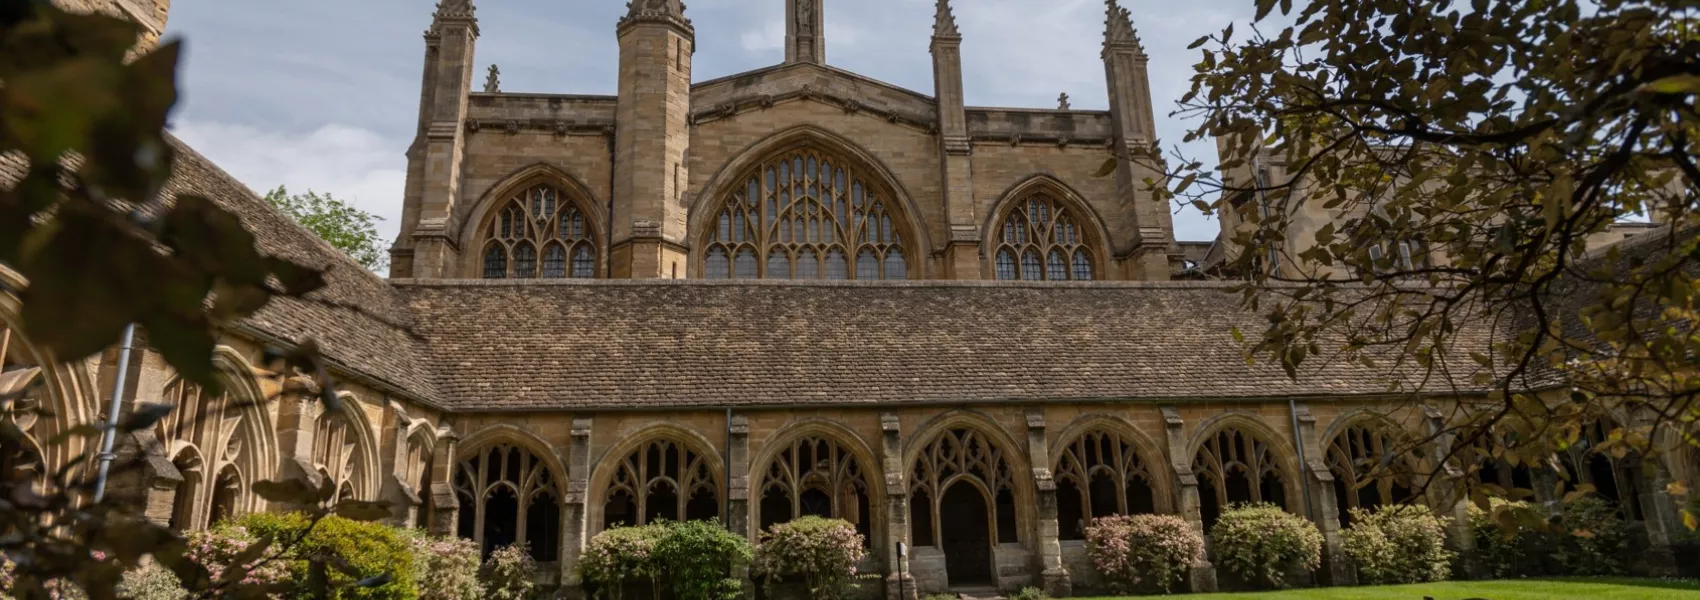 new college cloisters